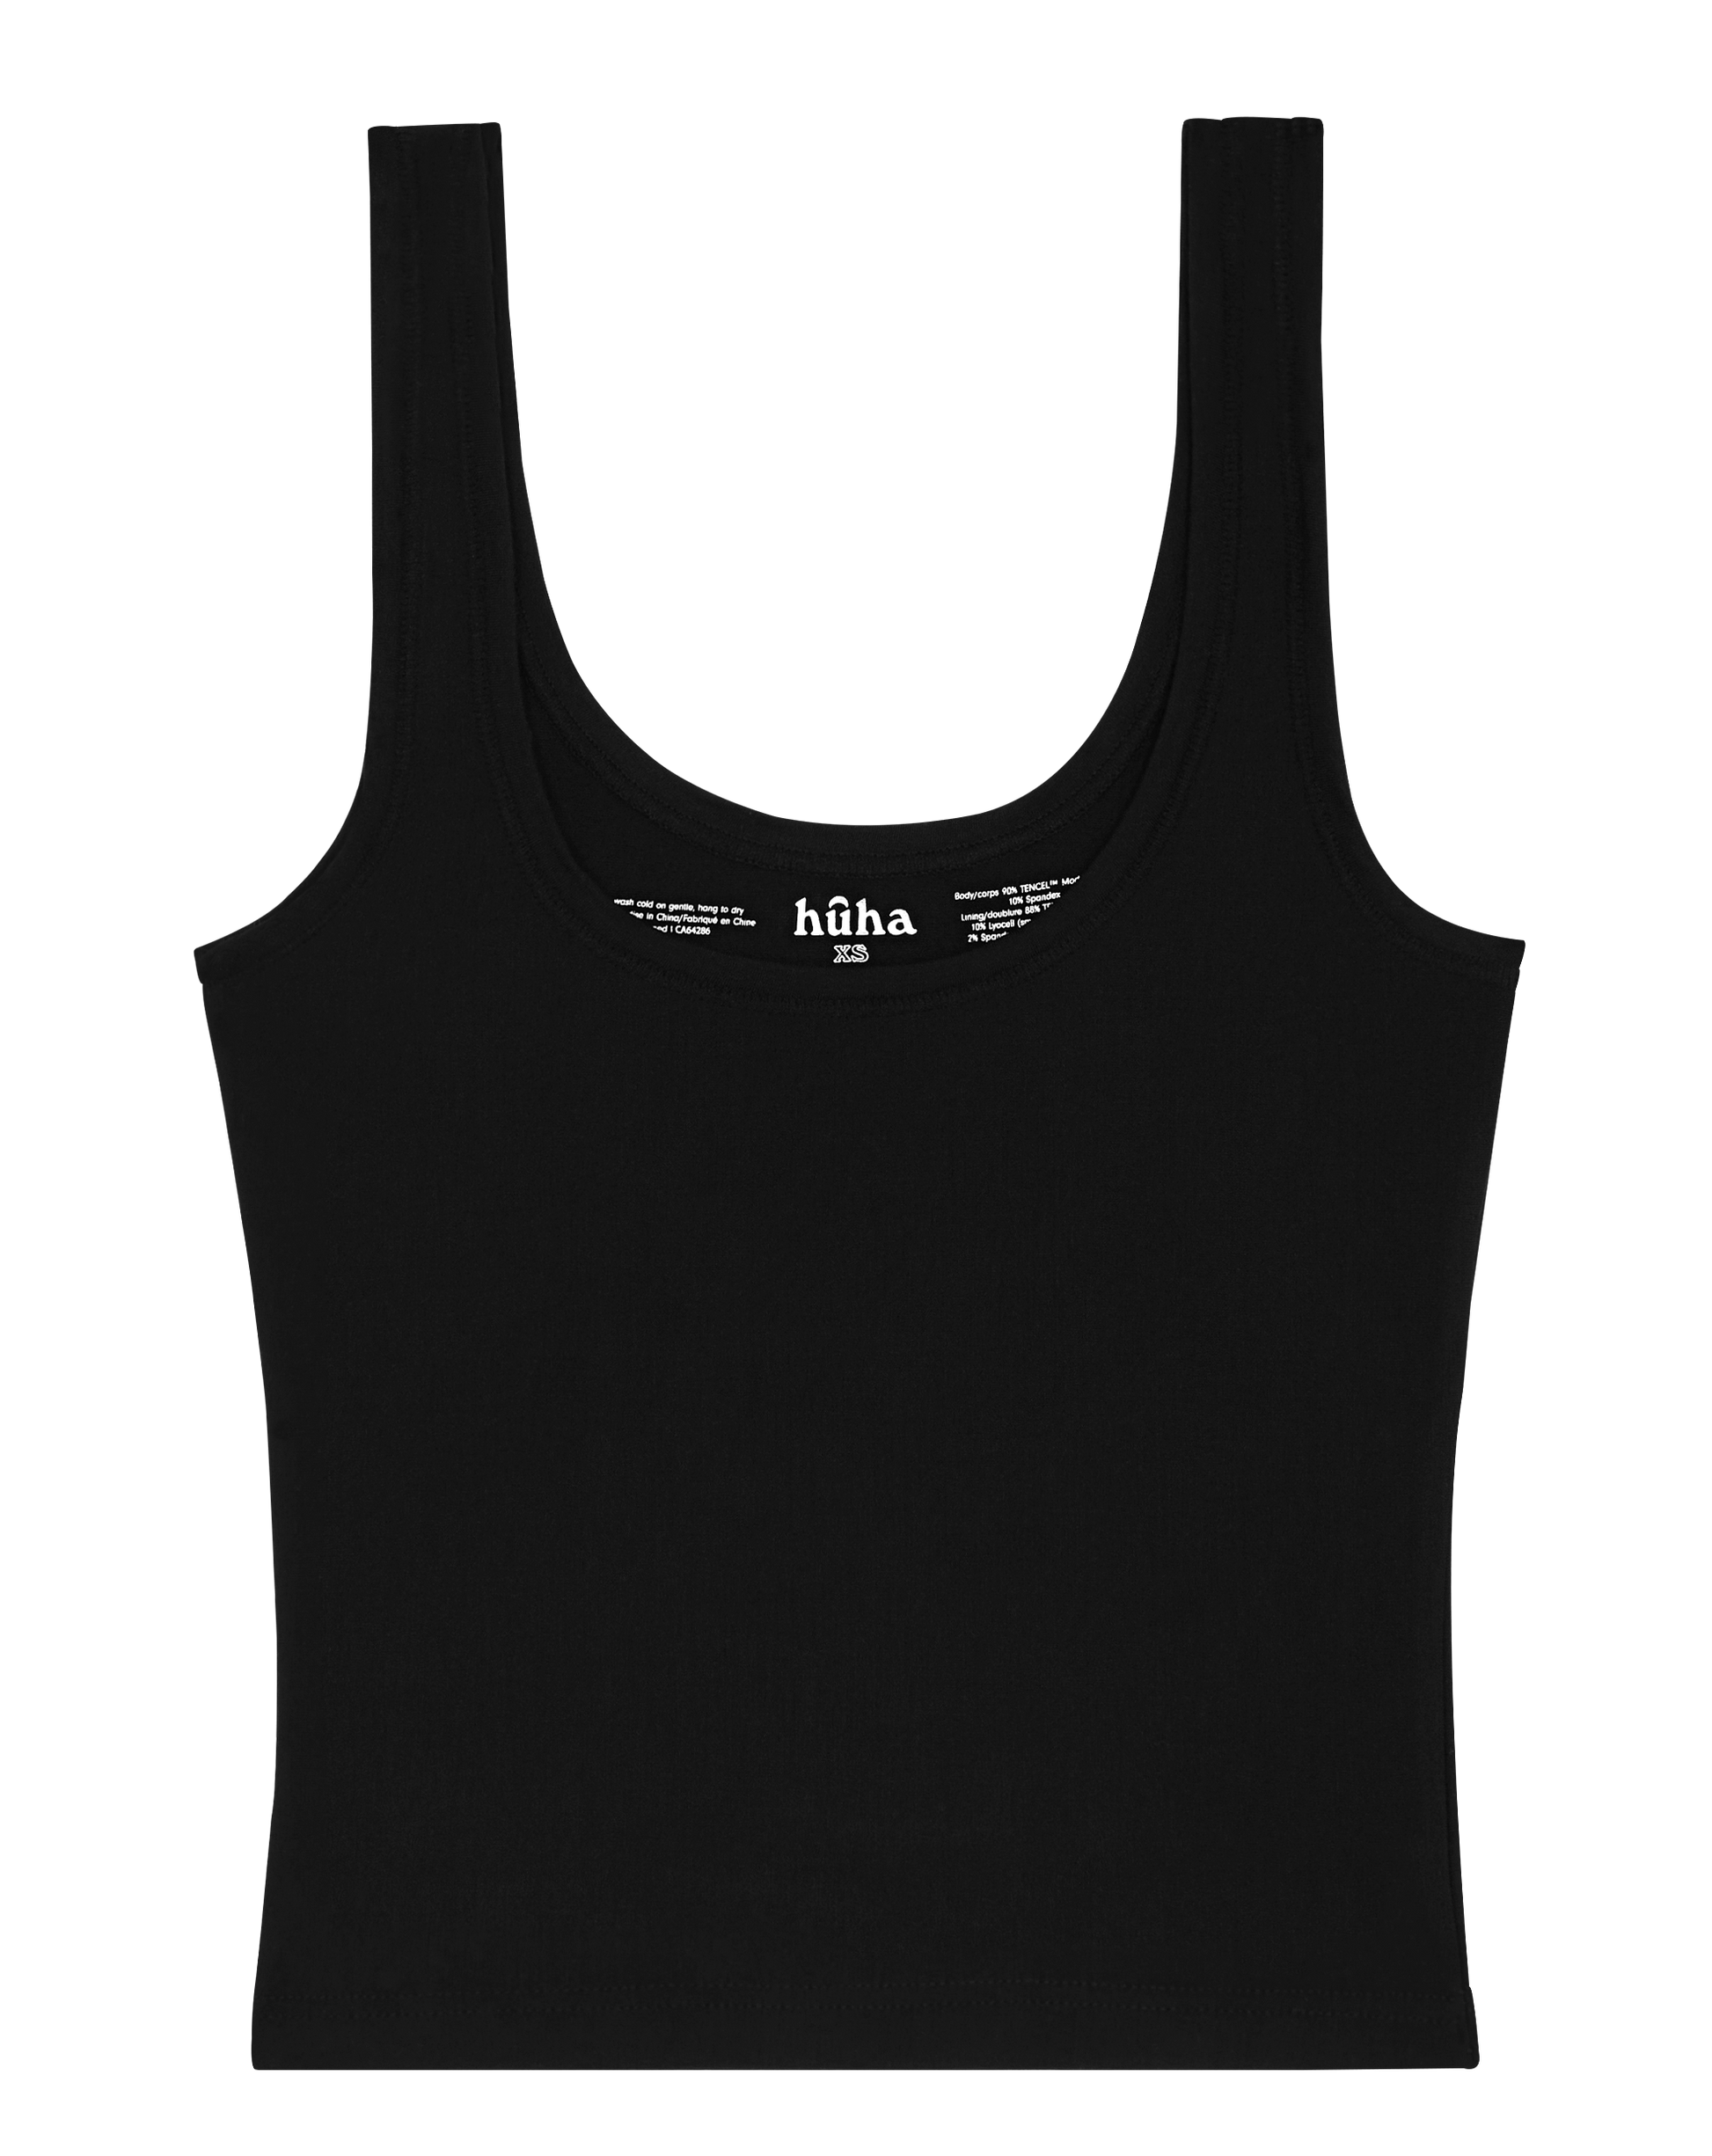 Women's Woven Shell Tank Top - A New Day™ Black L